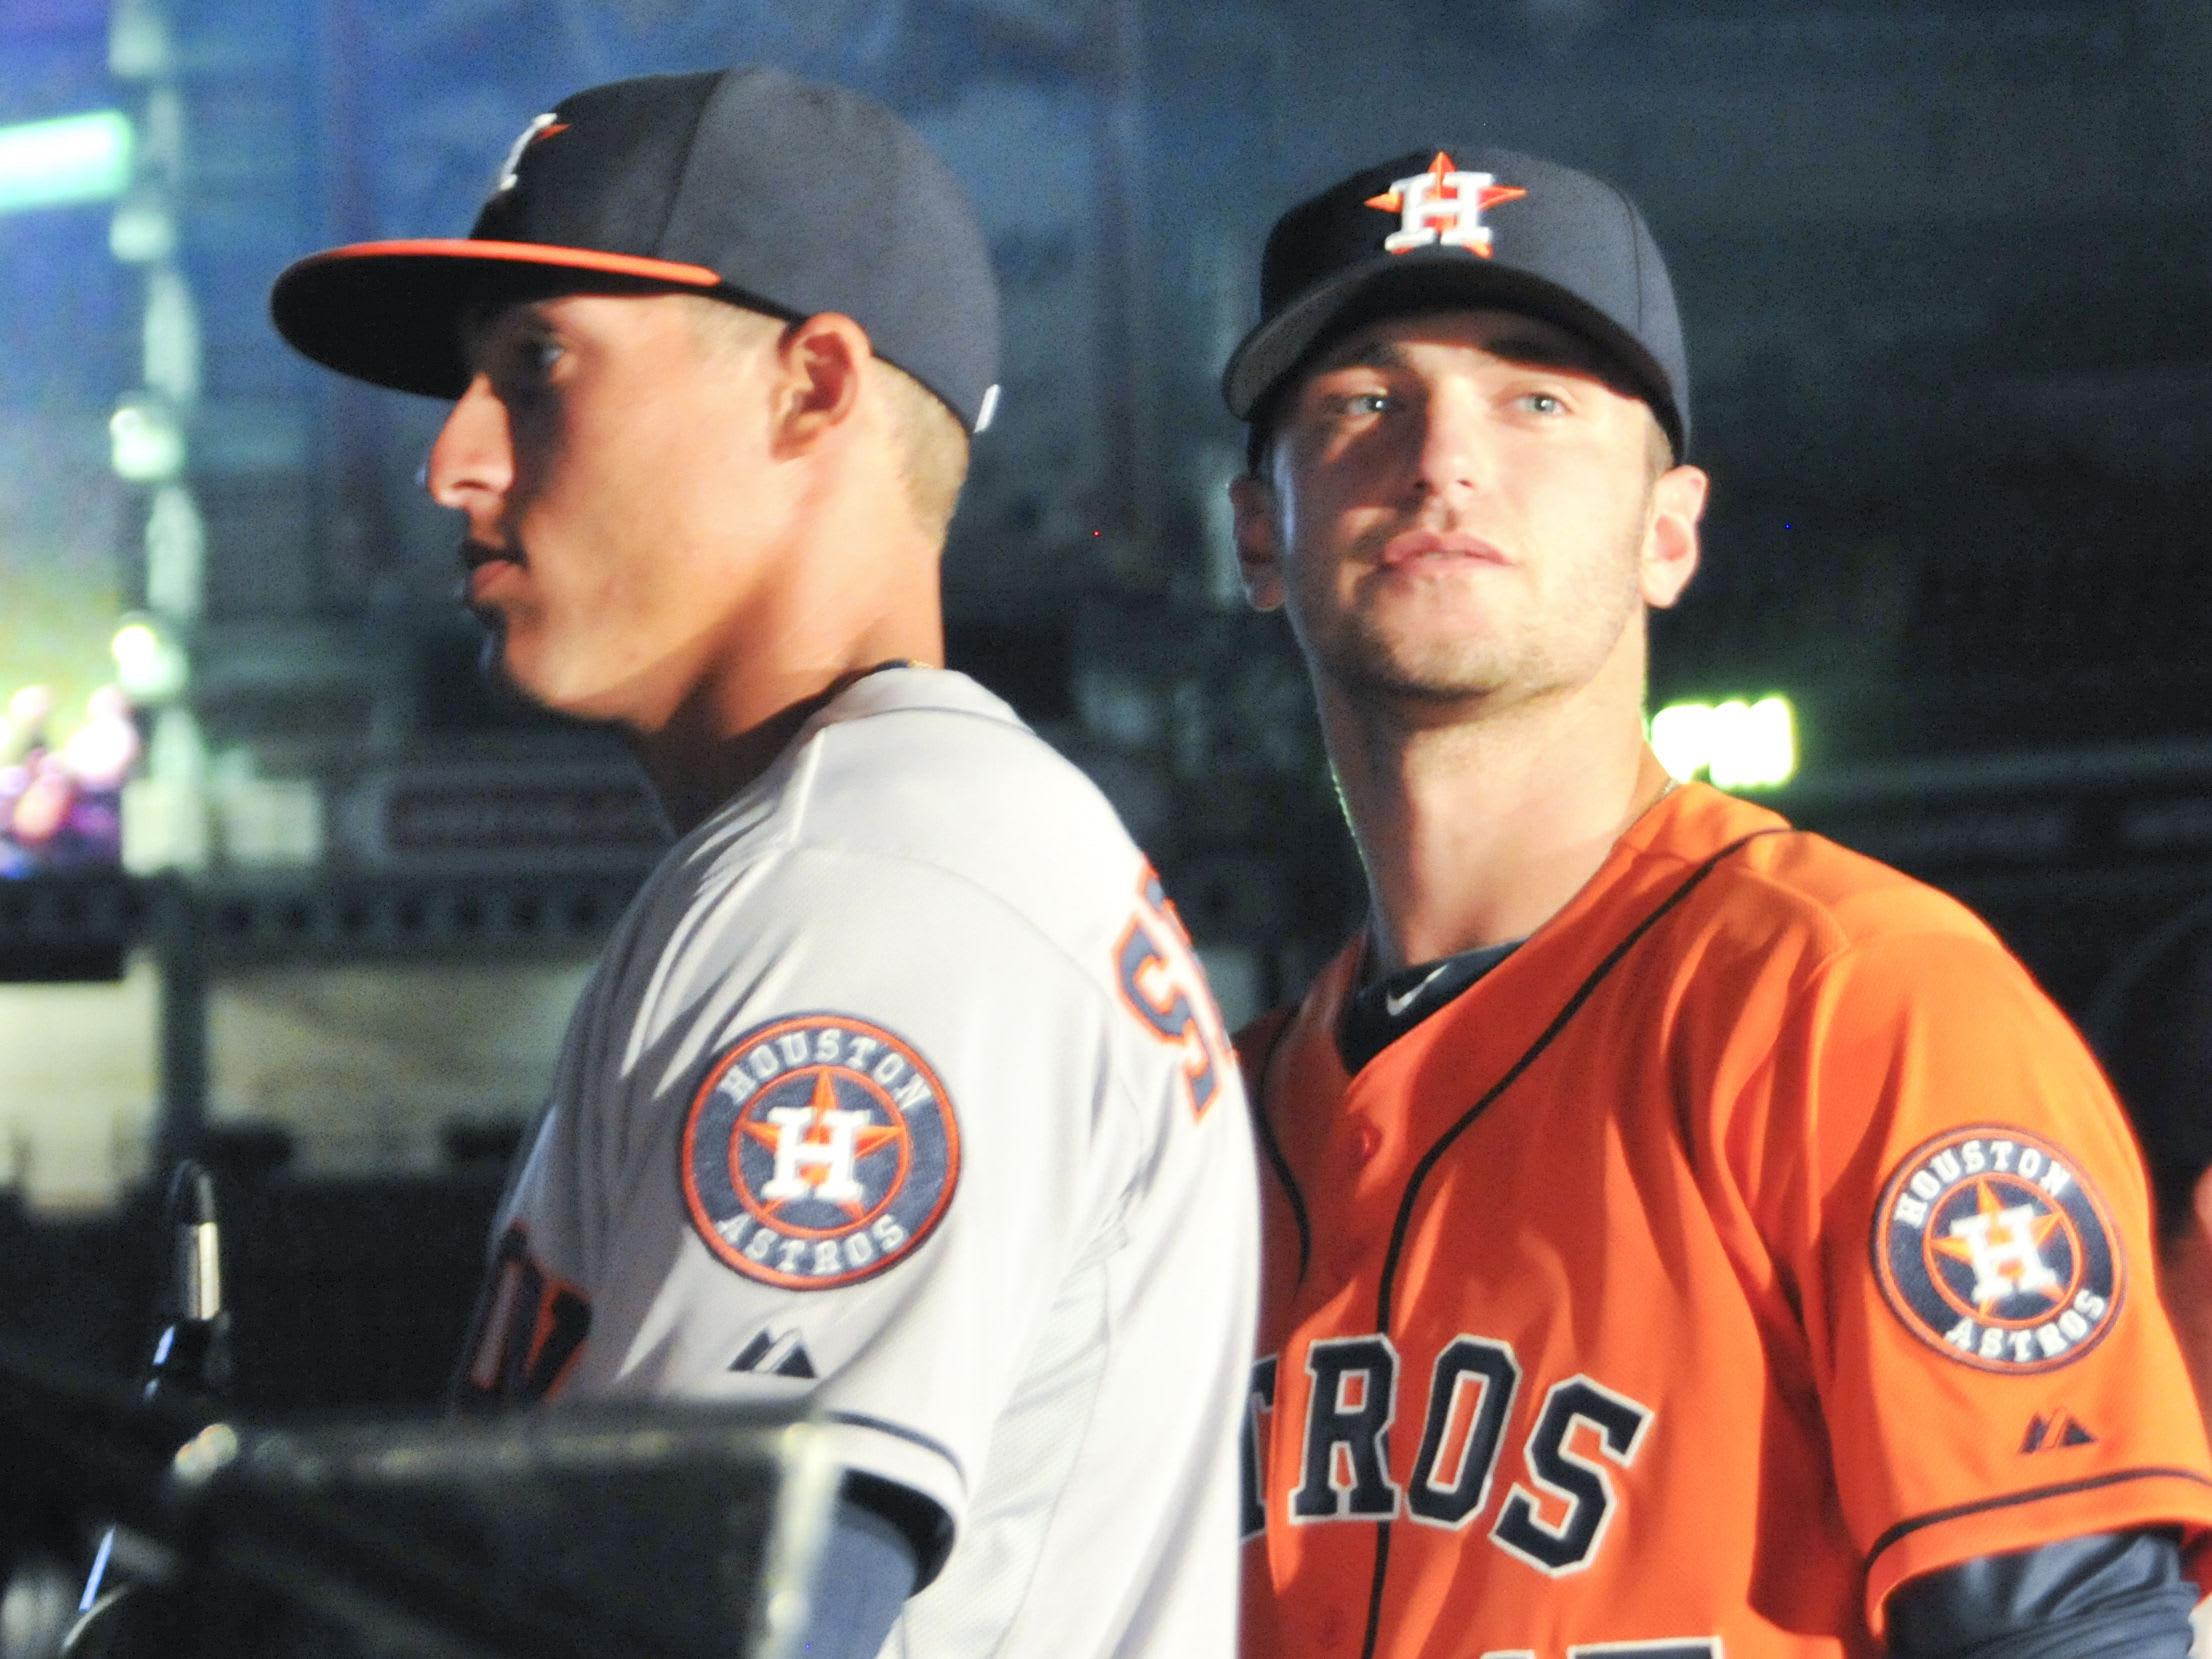 Lance Berkman to return to the Astros? New uniforms reveal brings